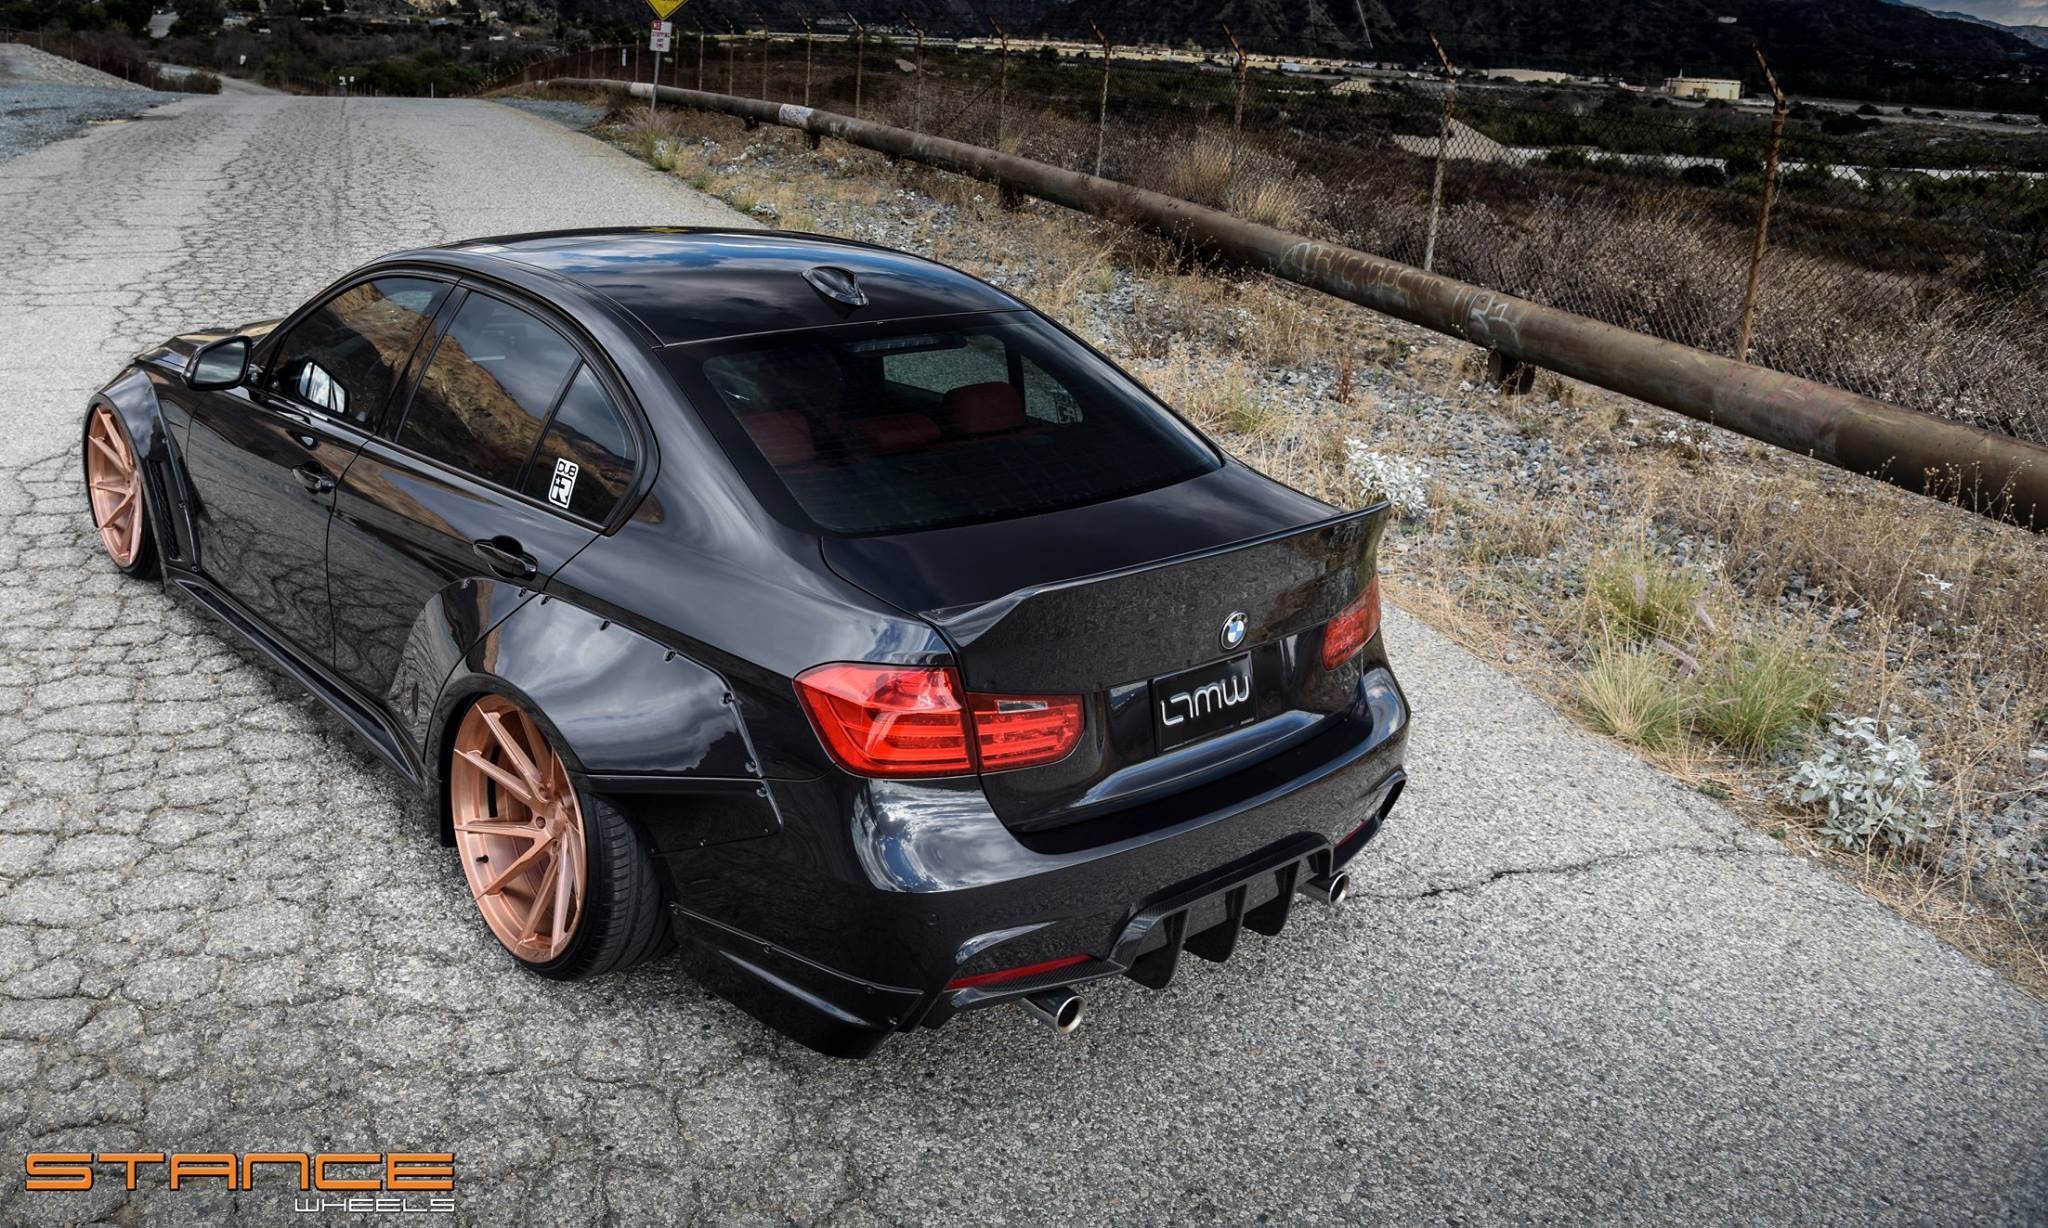 Custom Rear Diffuser on Black Stanced BMW 3-Series - Photo by Clinched